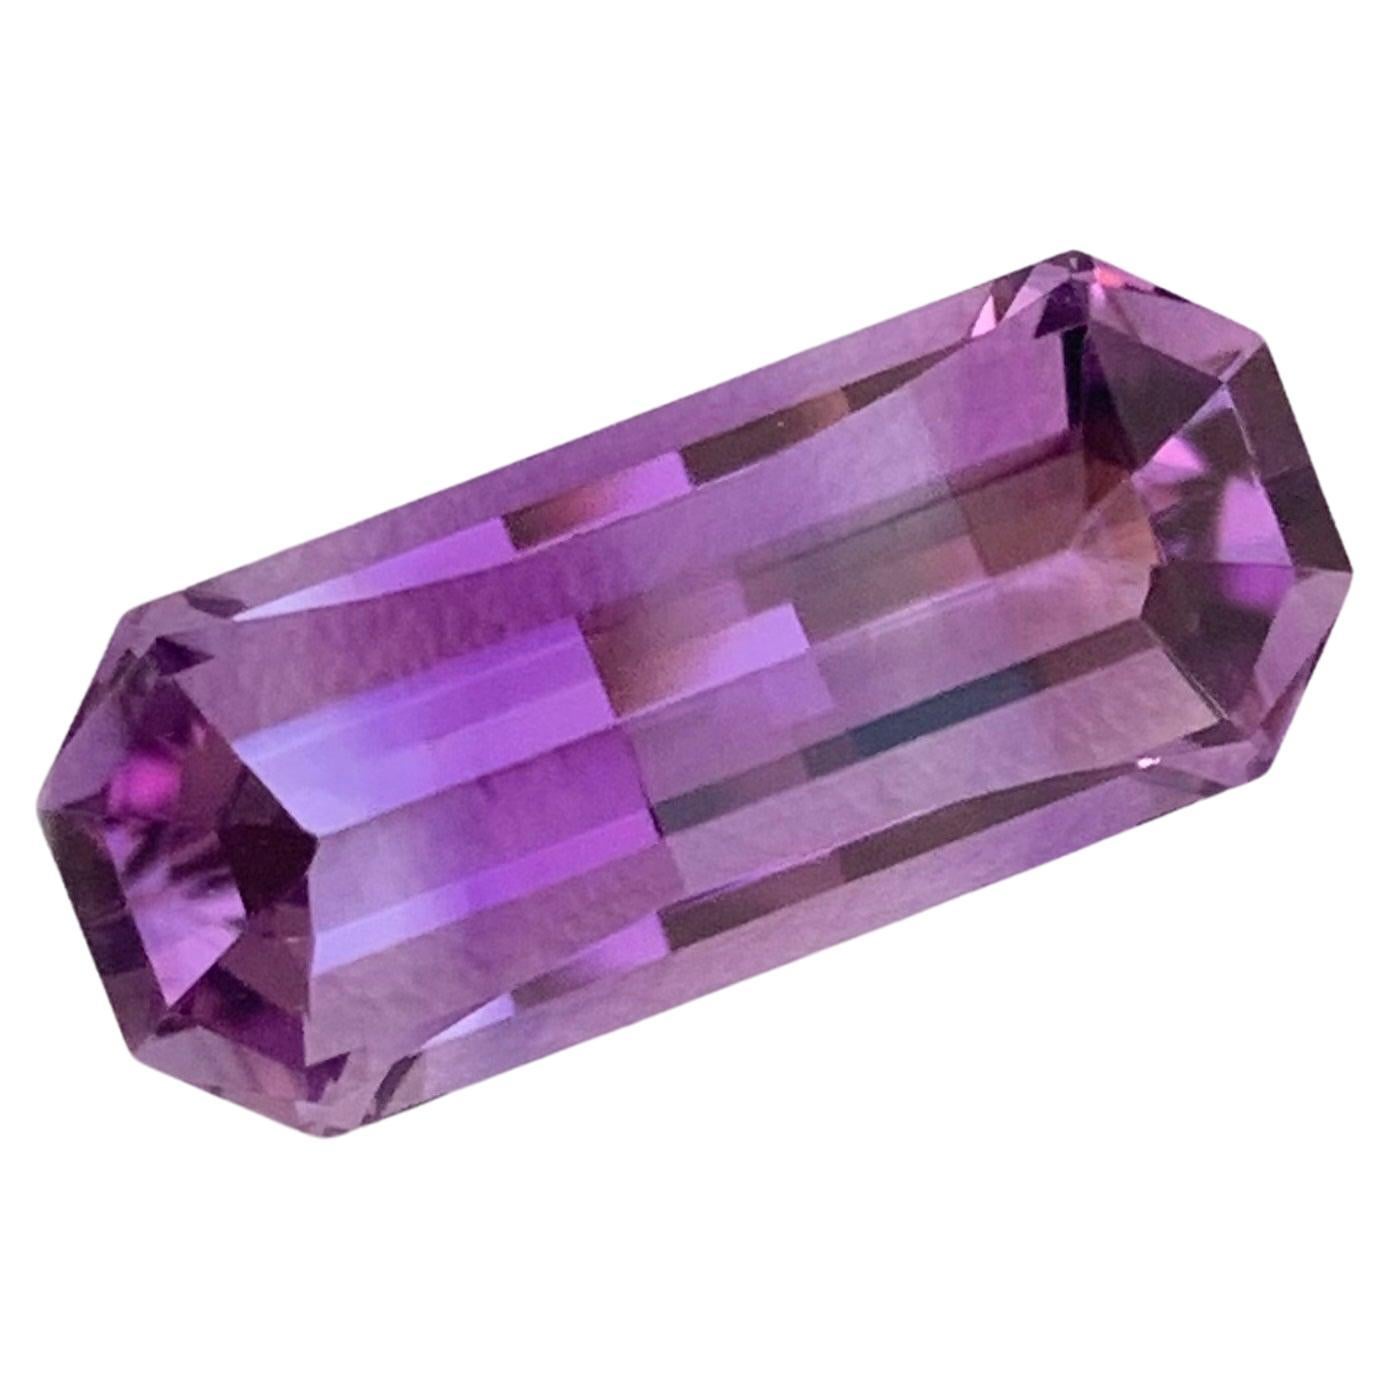 8.25cts Natural Loose Amethyst Gemstone Pixel Pixelated Cut From Brazil Mine For Sale